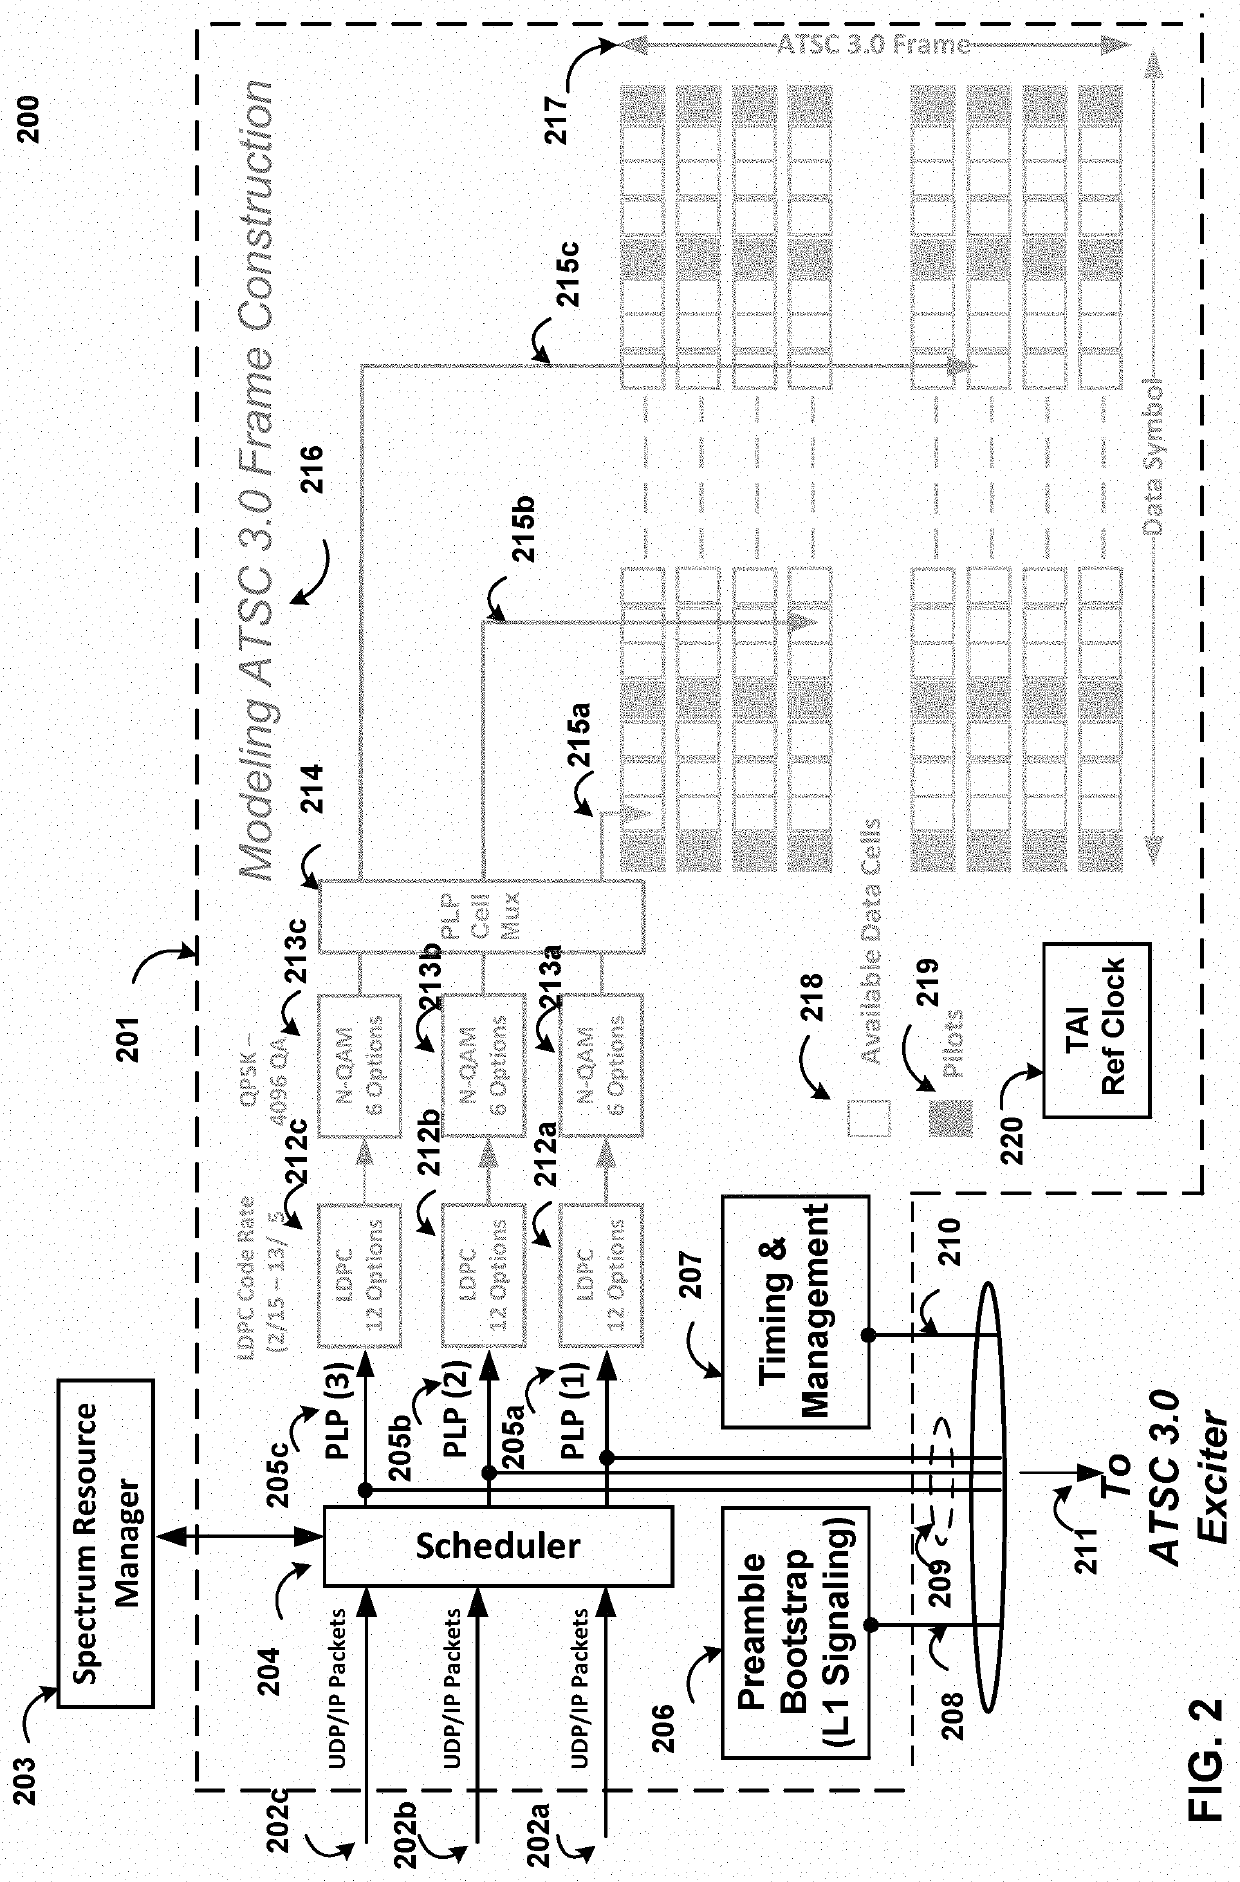 Enabling efficient deterministic virtualized broadcast spectrum sharing and usage validation